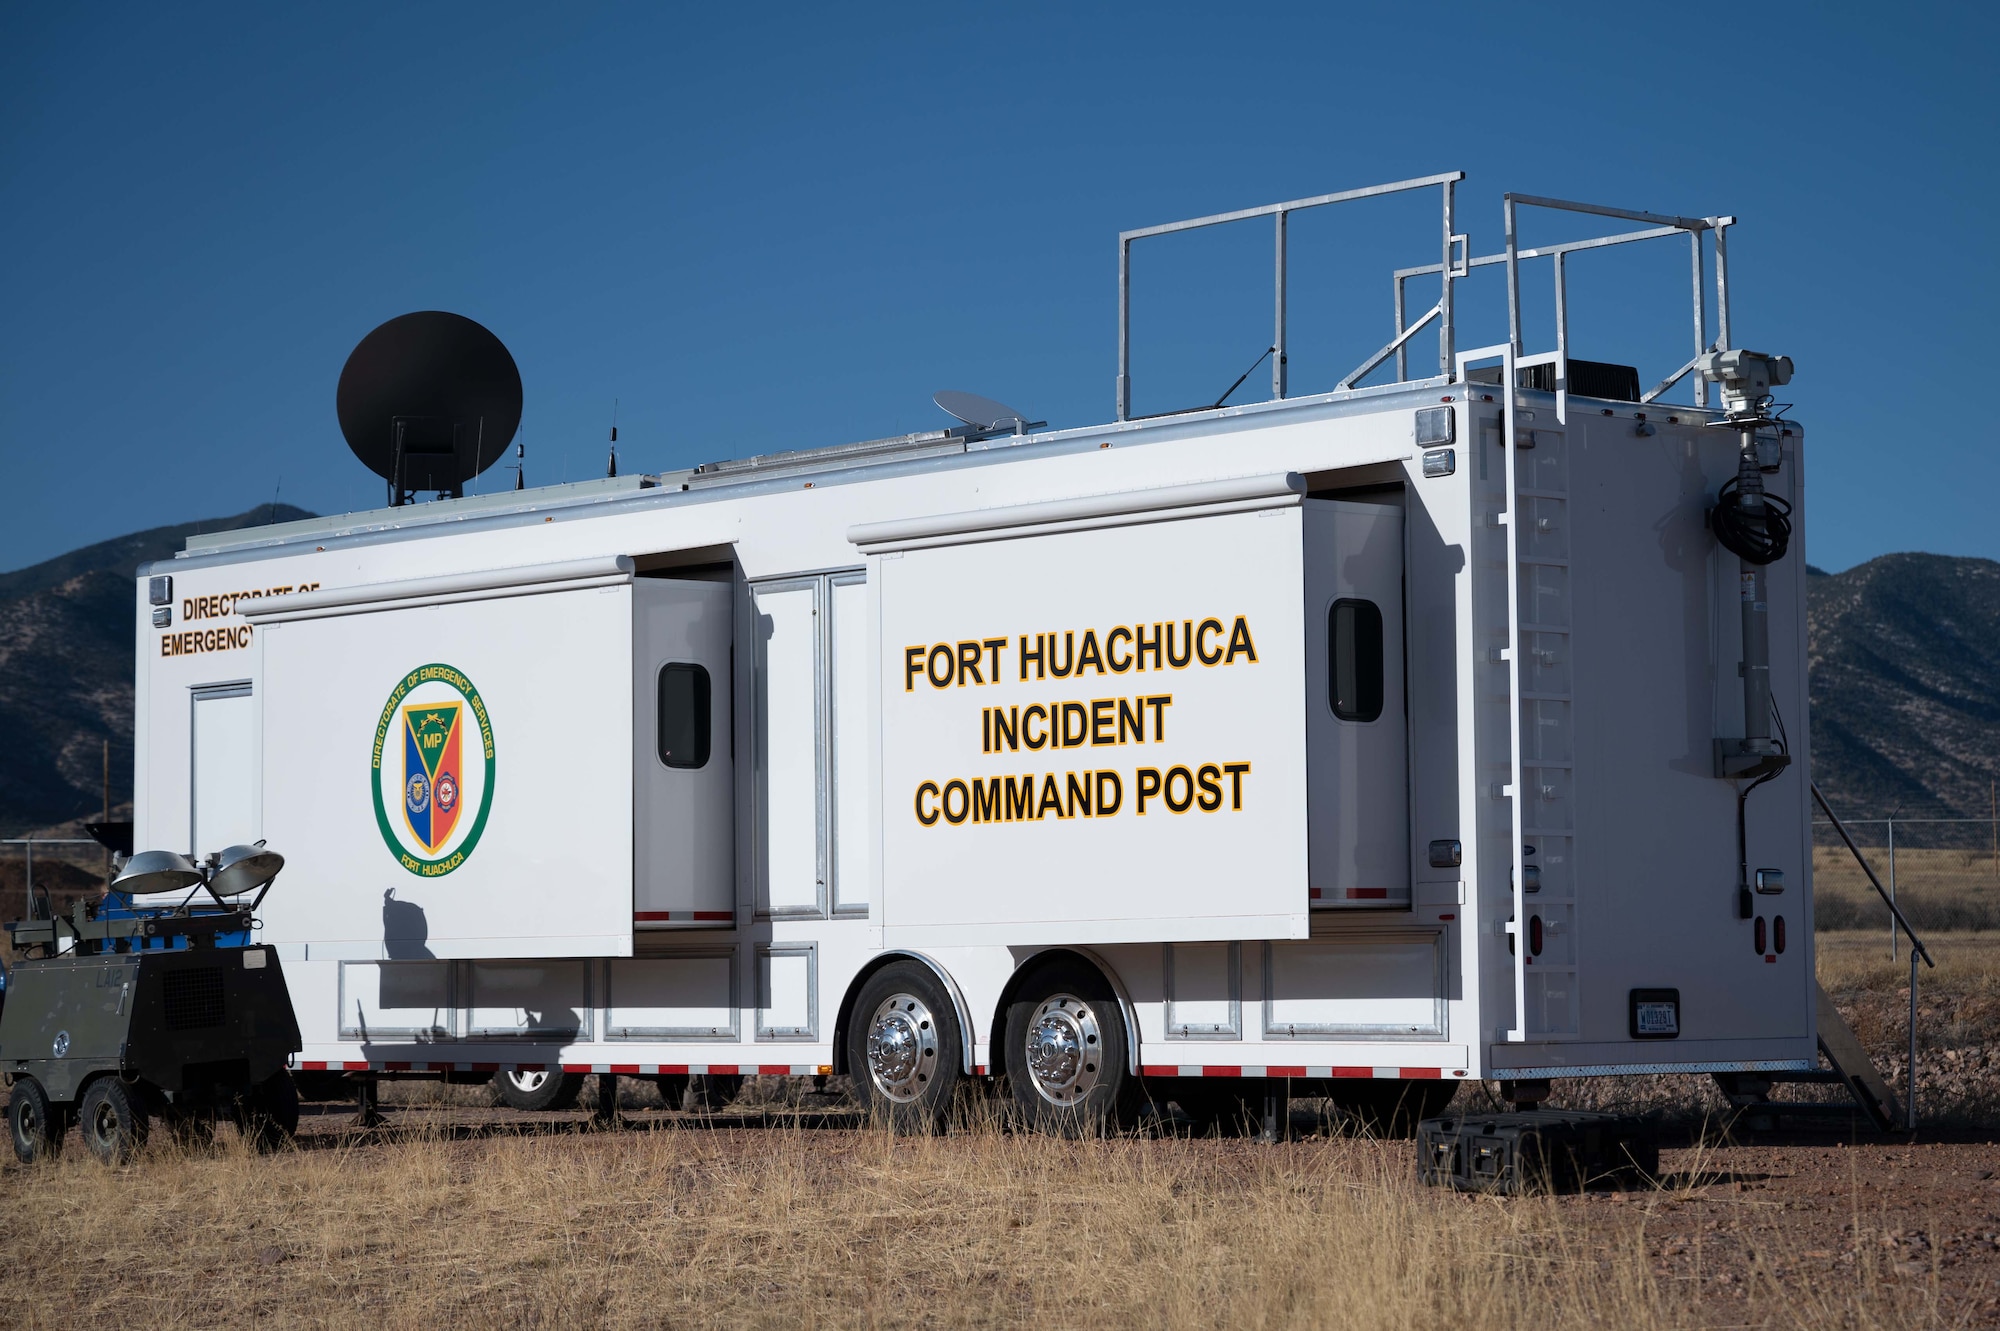 The Directorate of Emergency Services at U.S. Army Ft. Huachuca provide a mobile command and control operations center for the REAP 2.0 operational assessment on March 11.